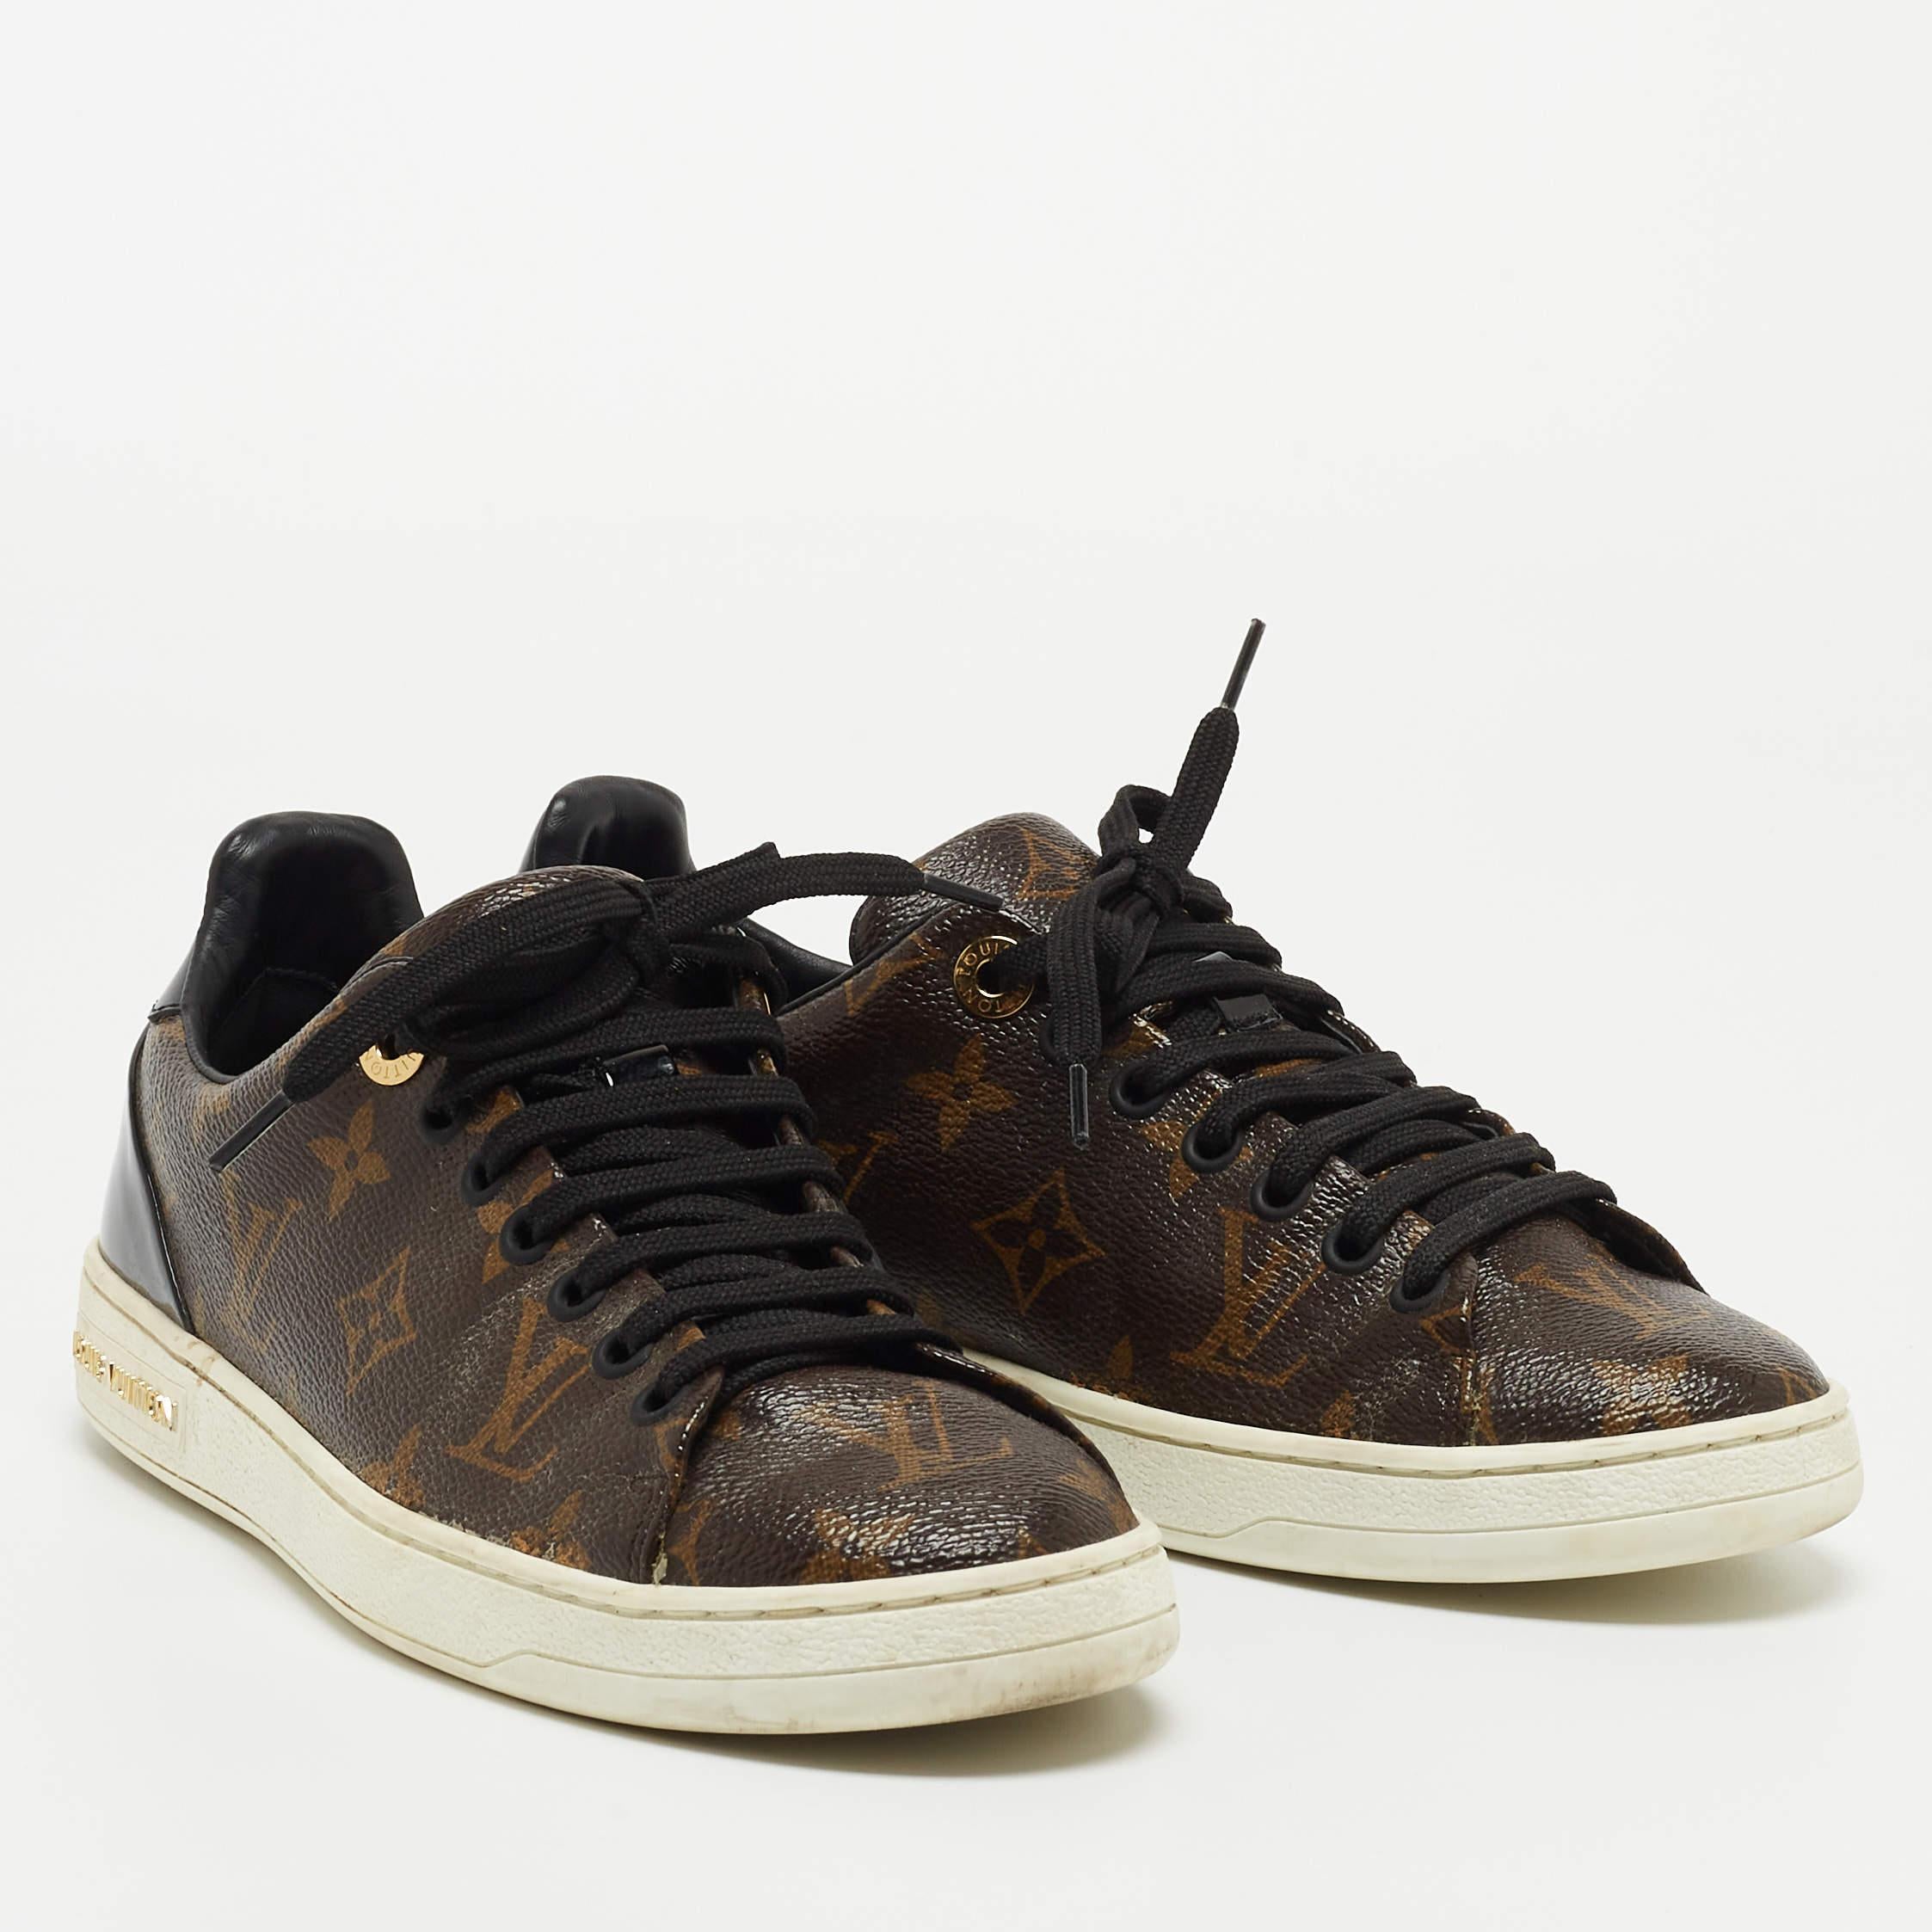 Designed to elevate your style quotient and give you comfort at the same time, these Louis Vuitton sneakers are crafted using the best materials. Pair them with your casuals for a cool look.

